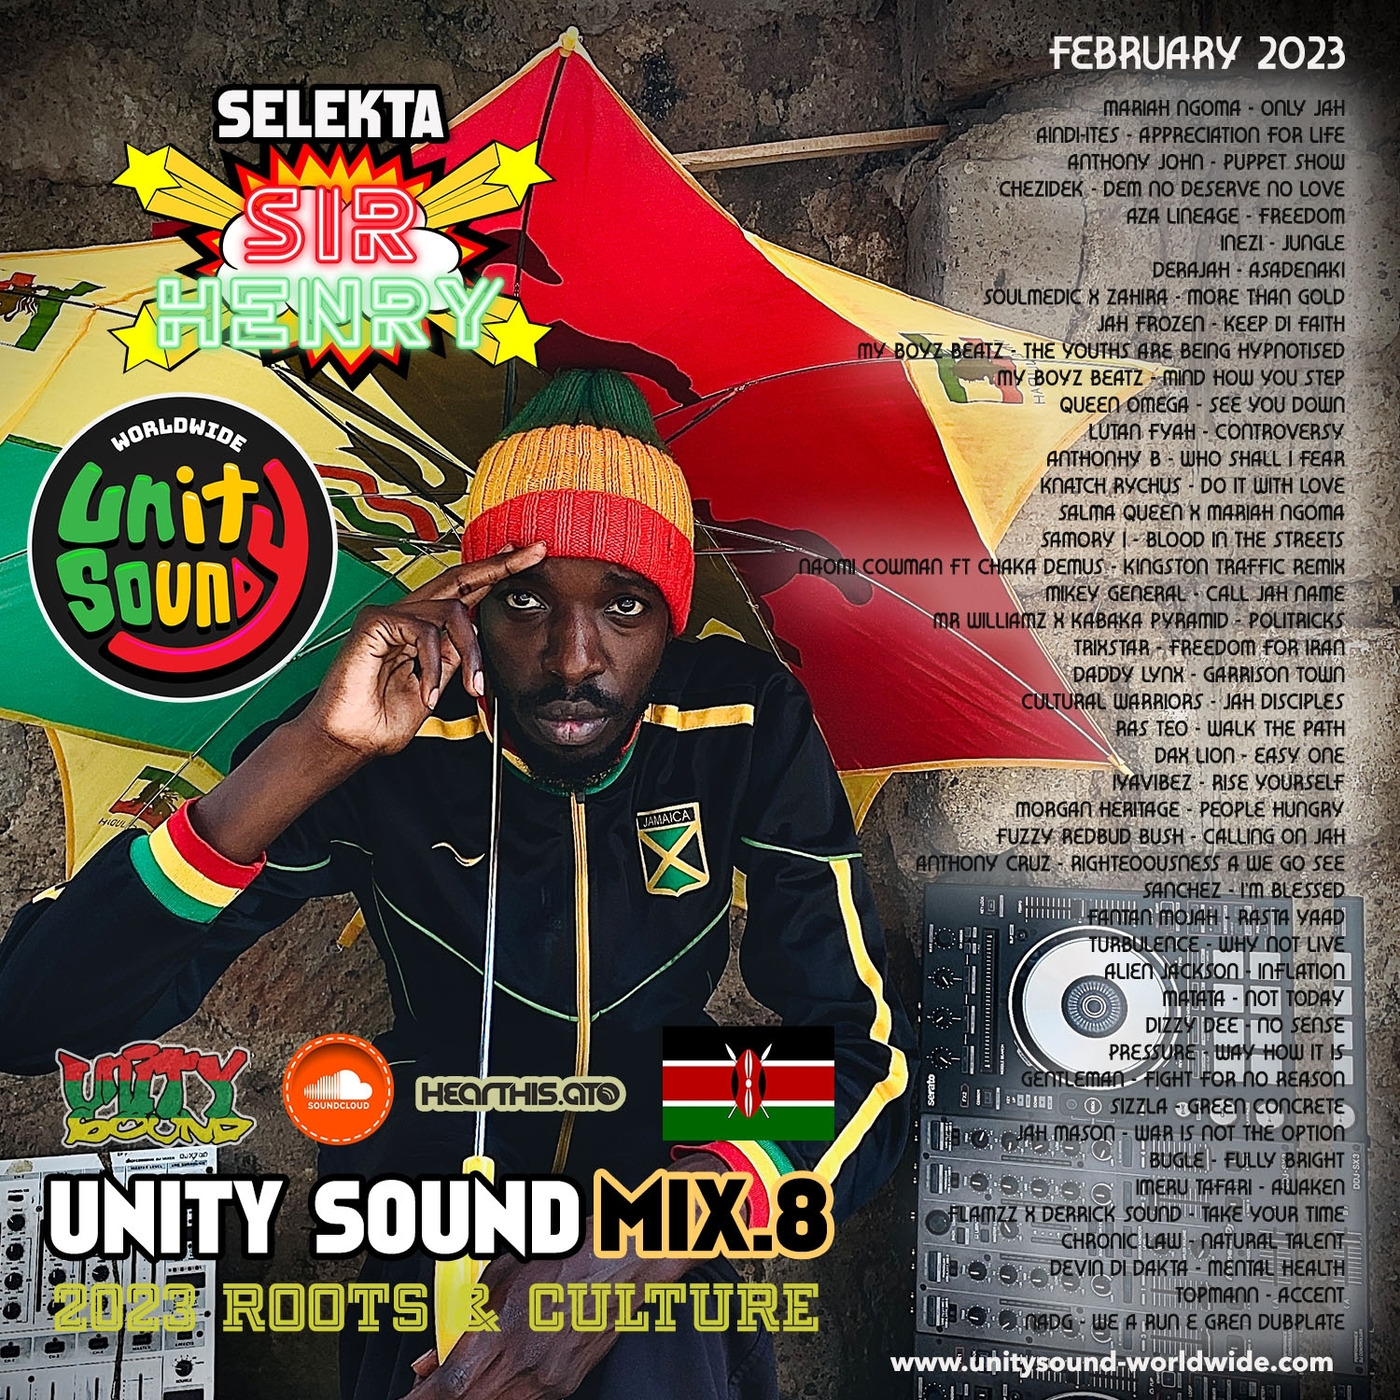 Selekta Sir Henry - Unity Sound Mix 8 - Roots & Culture & More 2023